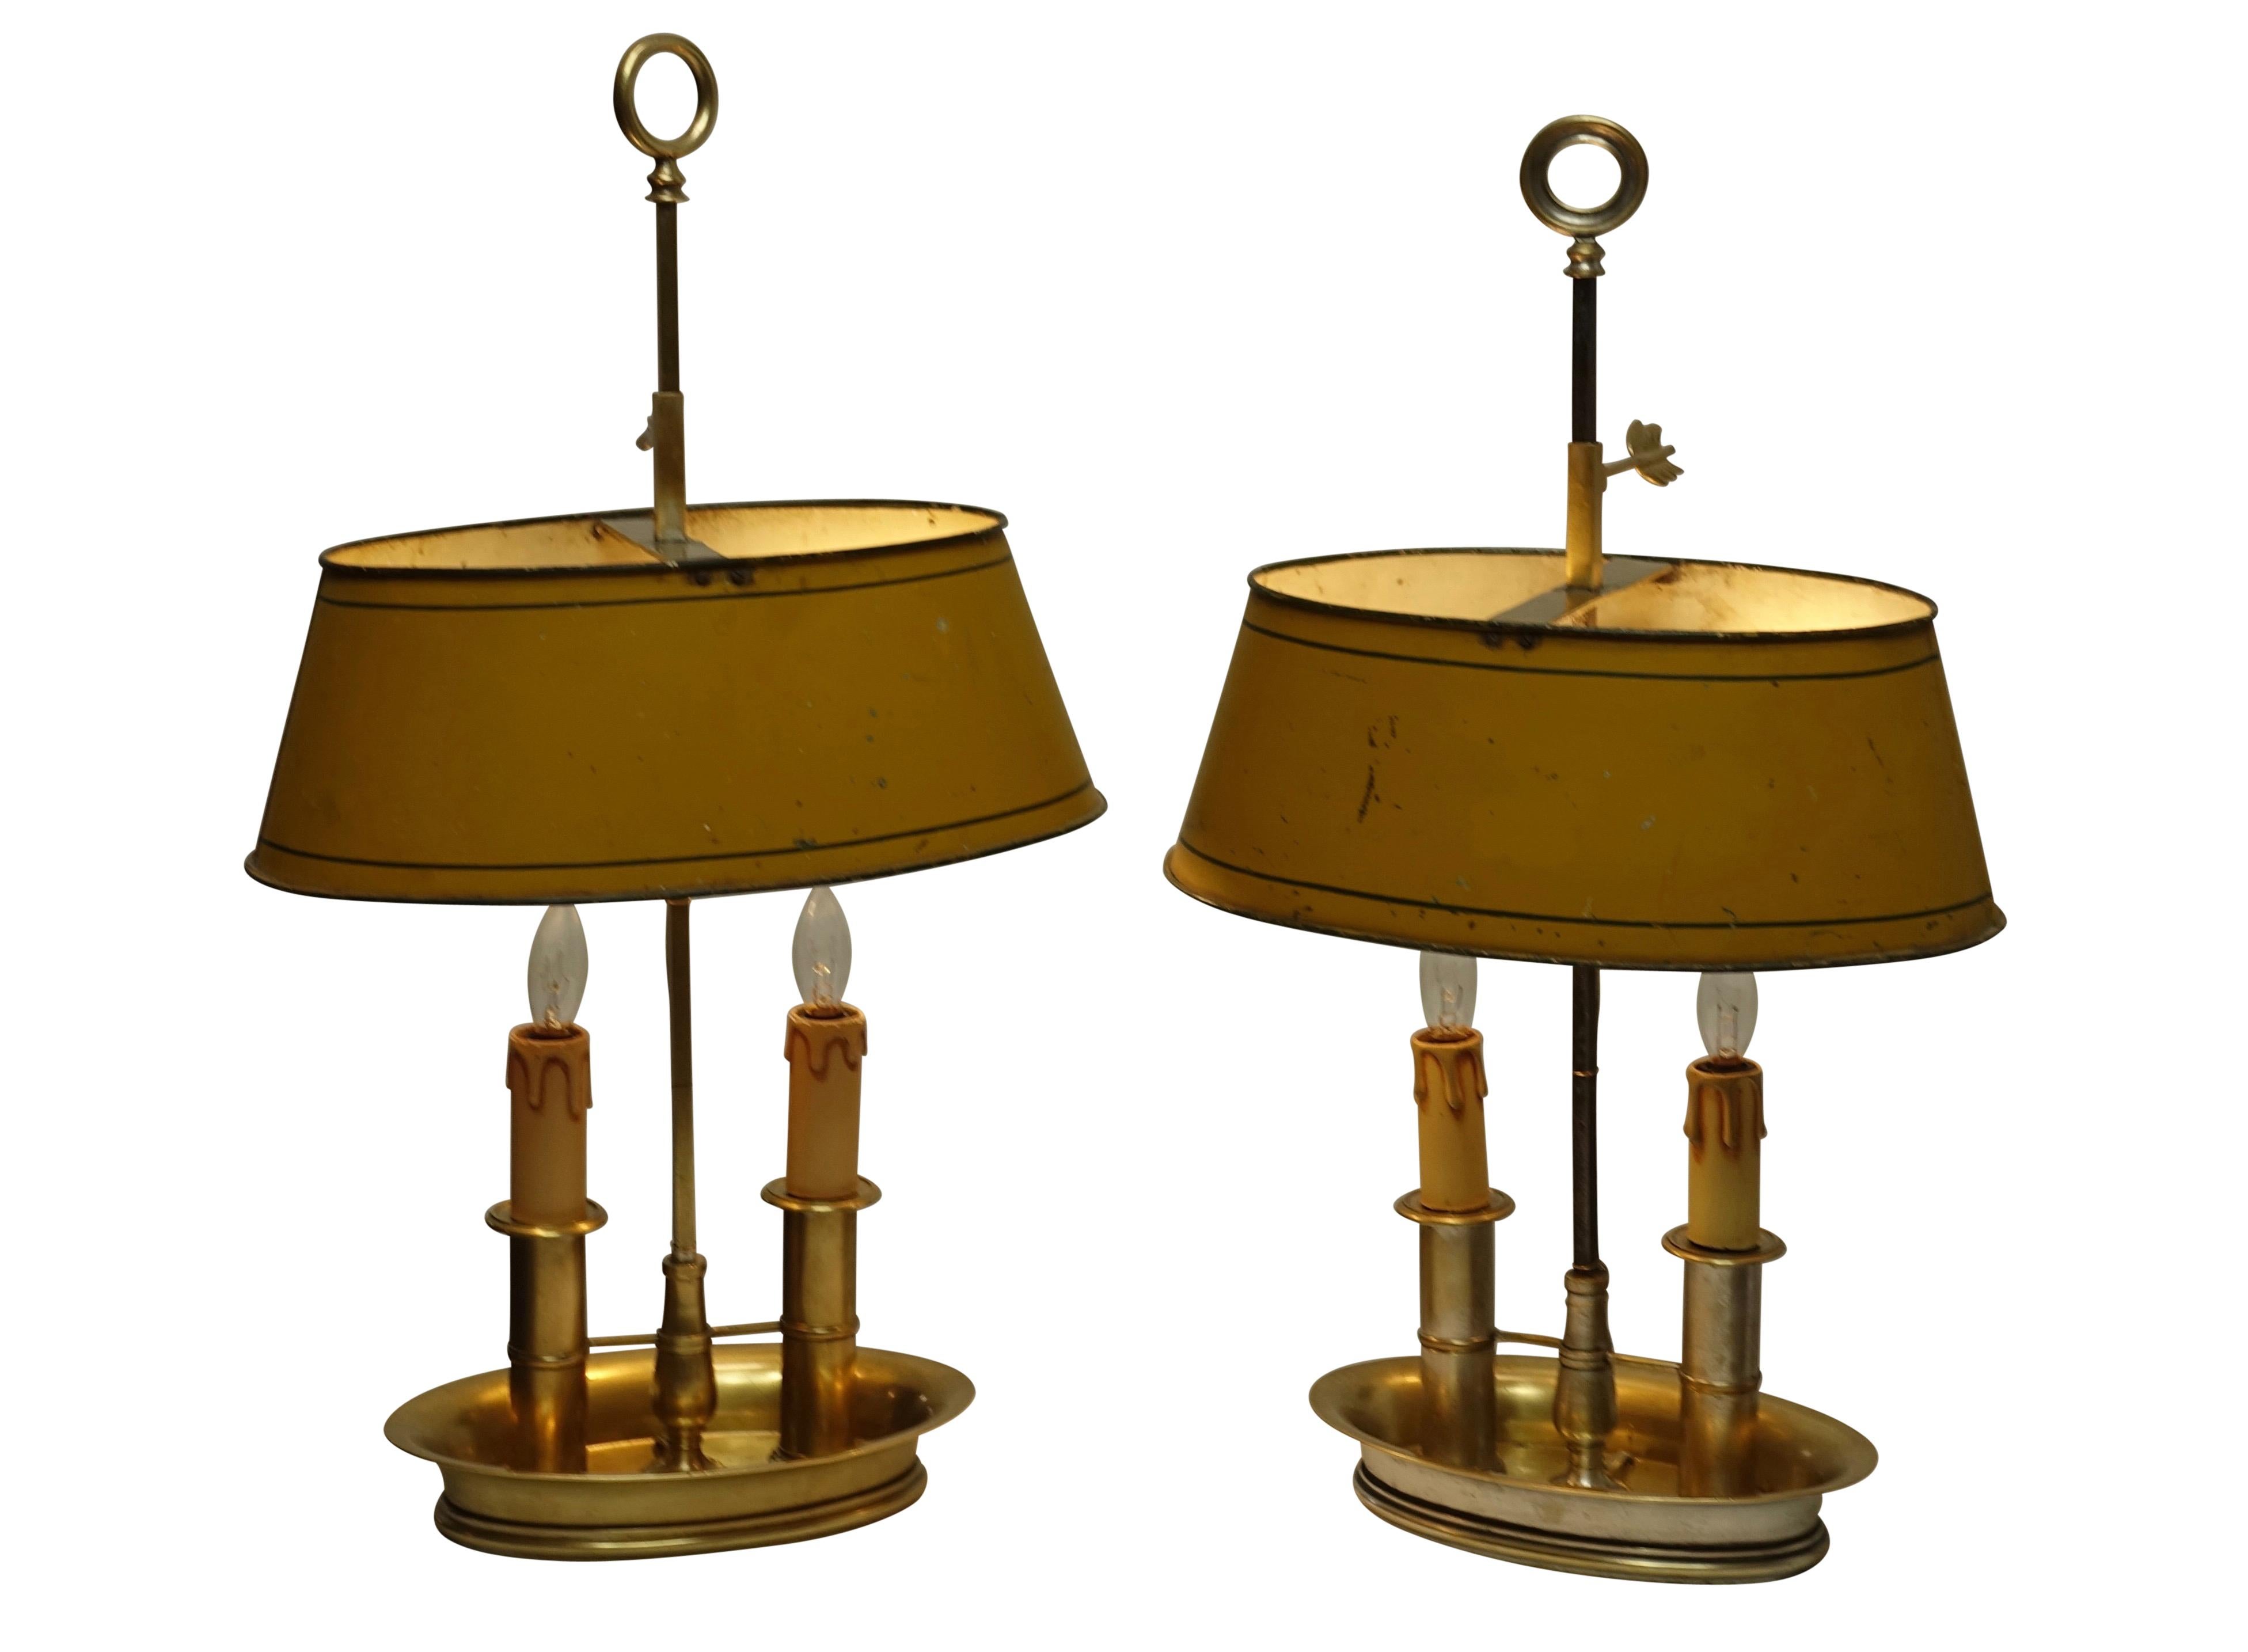 Pair of Brass Bouilotte Lamps with Yellow Tole Shades, French Early 19th Century 3